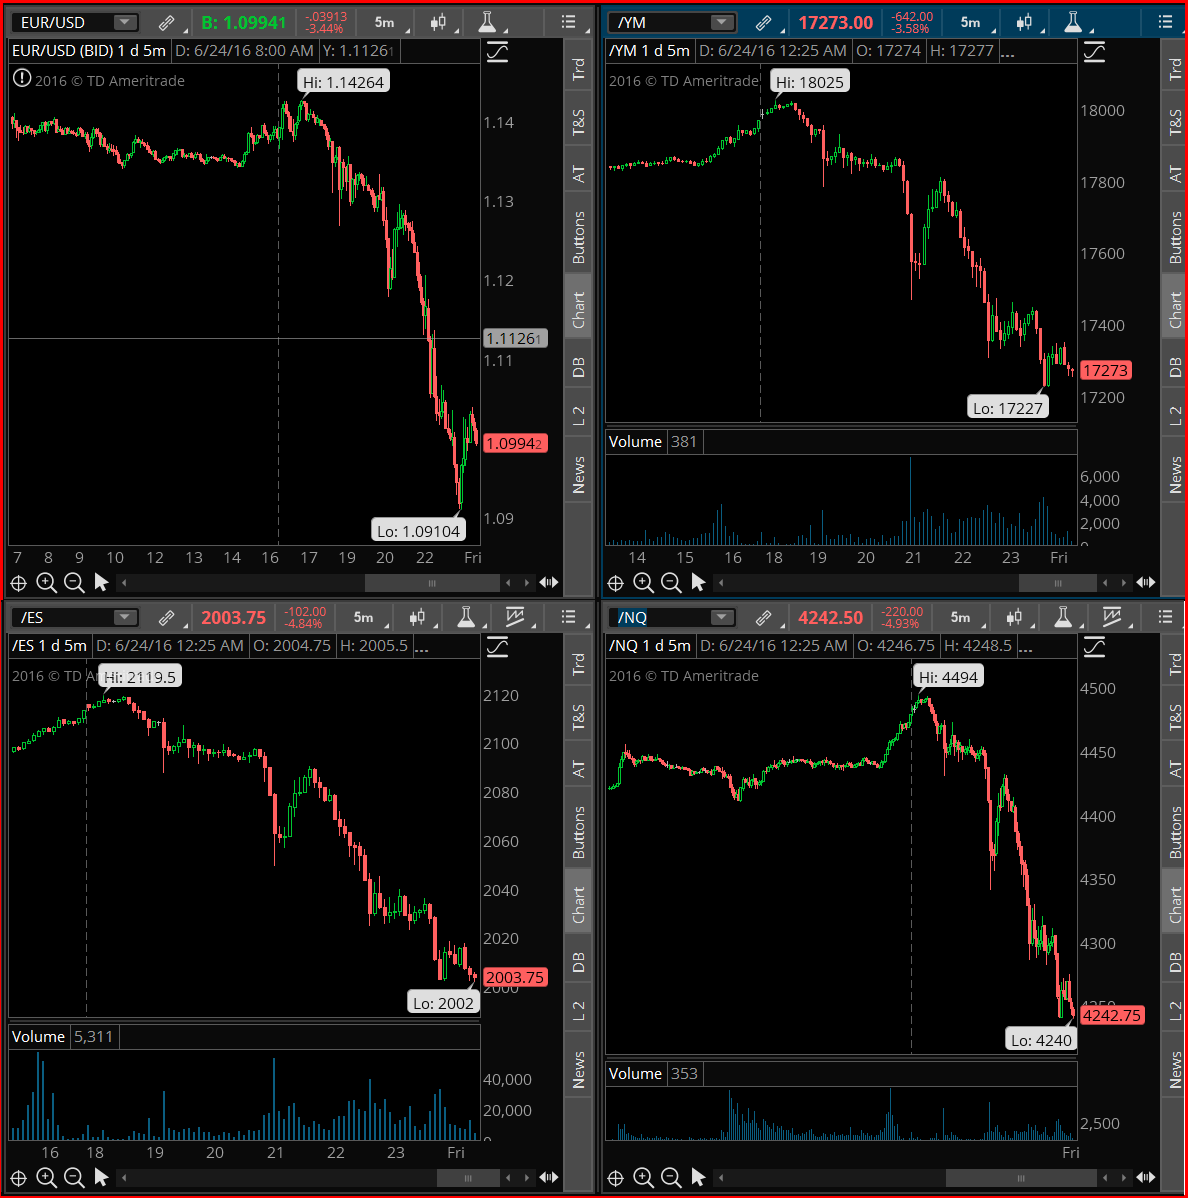 market panic futures selling off